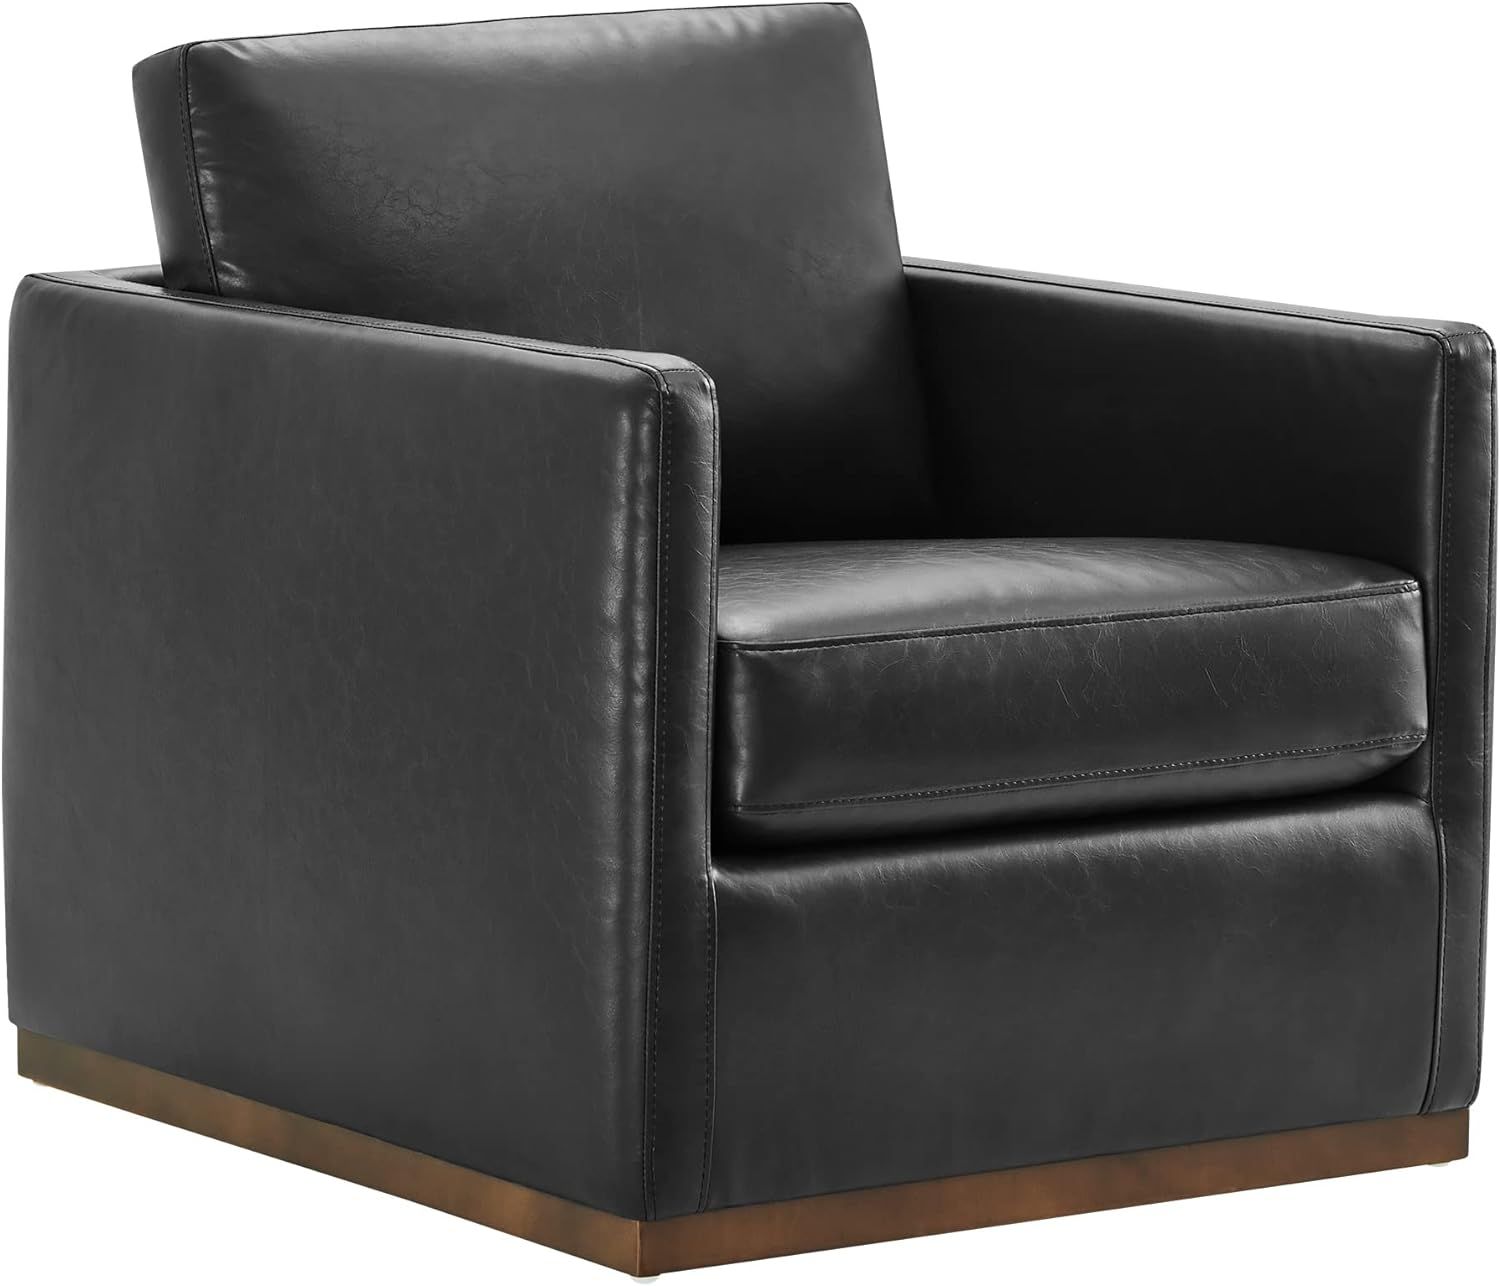 CHITA Swivel Accent Chair, Mid Century Modern Arm Chair for Living Room and Bedroom, Black | Amazon (US)